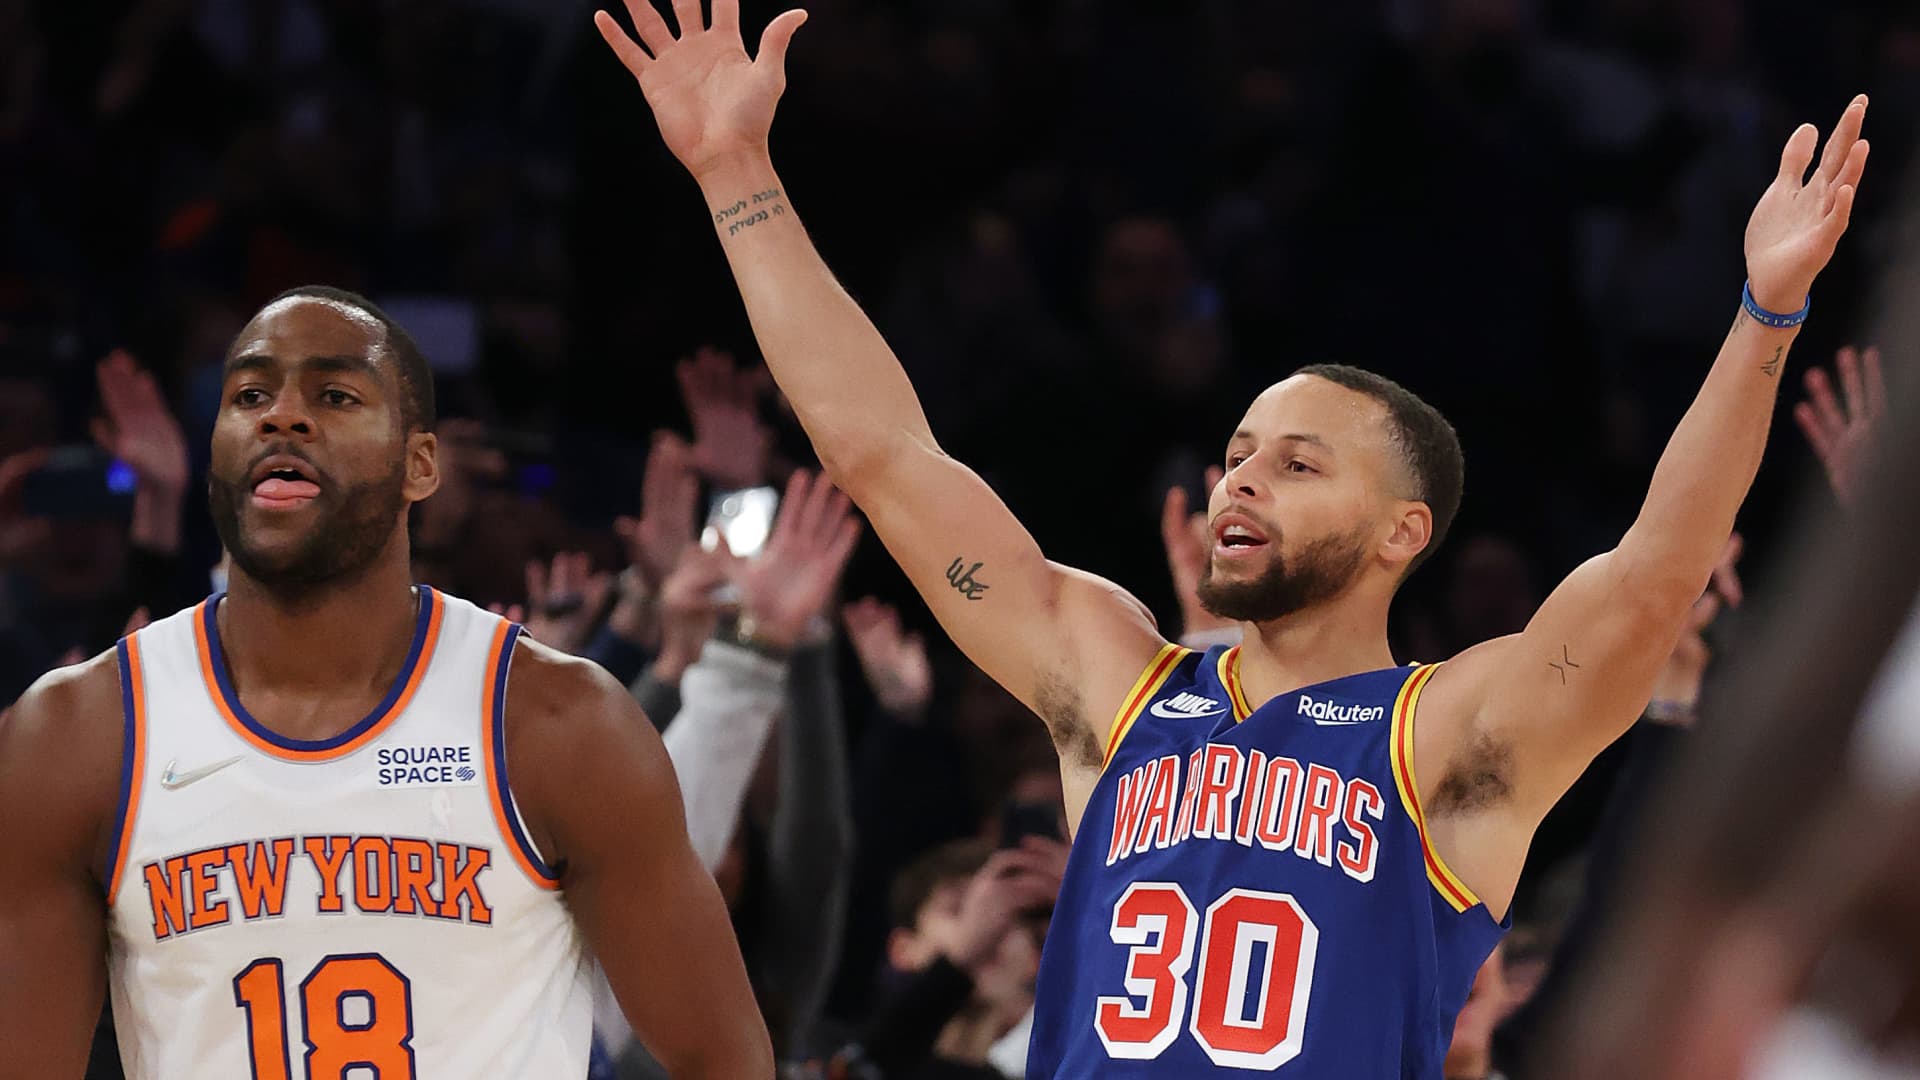 Stephen Curry #30 of the Golden State Warriors celebrates after making a three point basket to break Ray Allen’s record for the most all-time as Alec Burks #18 of the New York Knicks looks o during their game at Madison Square Garden on December 14, 2021 in New York City.